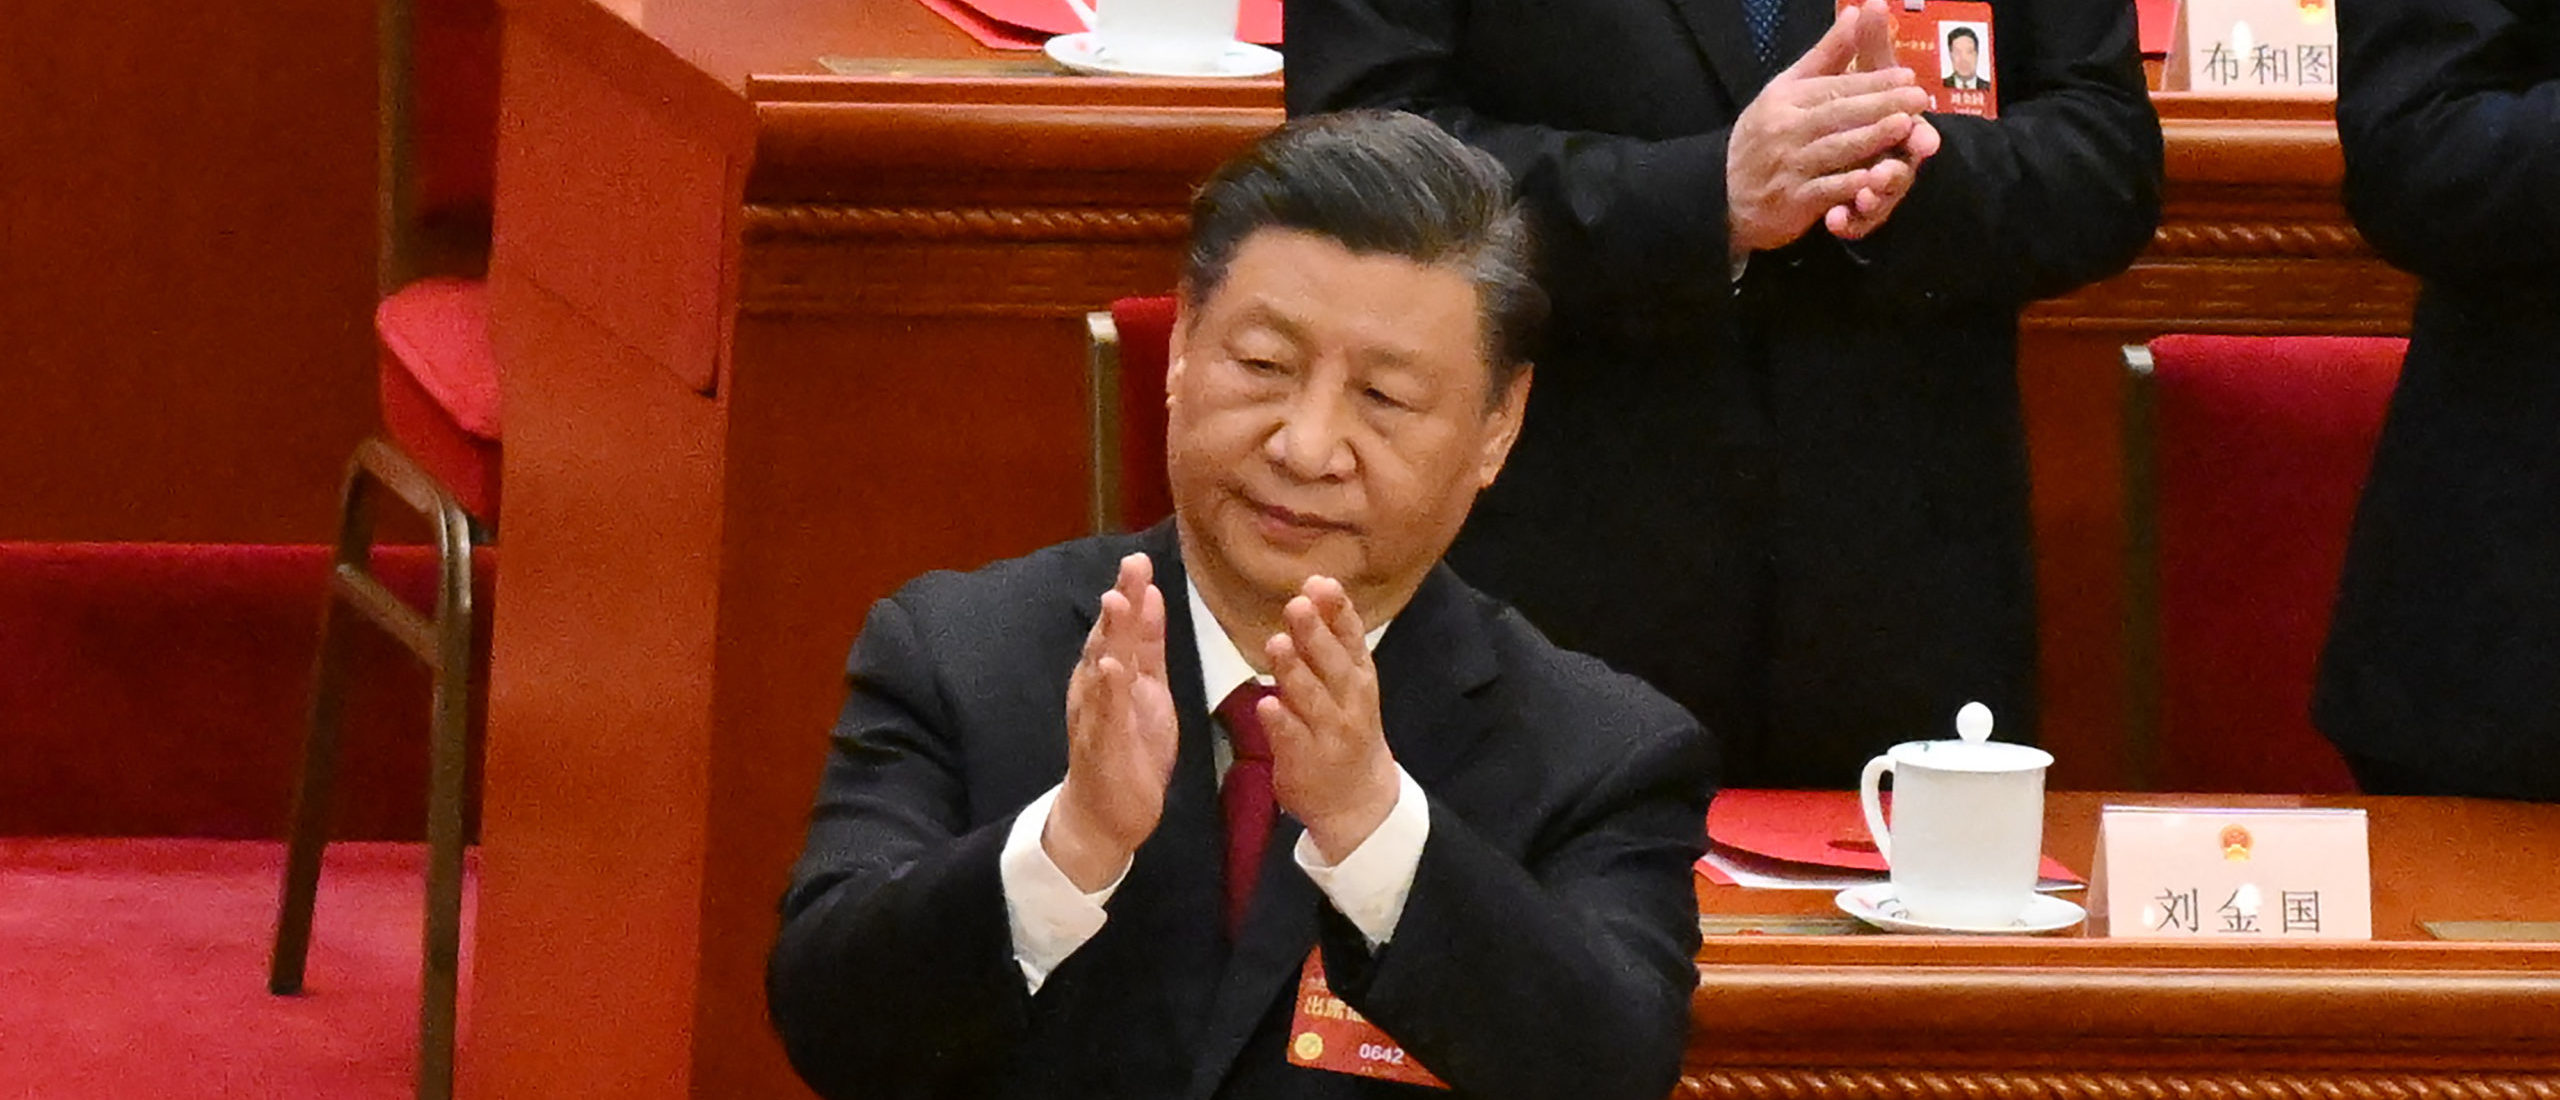 China's President Xi Jinping applauds after the closing session of the National People's Congress (NPC) at the Great Hall of the People in Beijing on March 13, 2023. (Photo by NOEL CELIS/POOL/AFP via Getty Images)